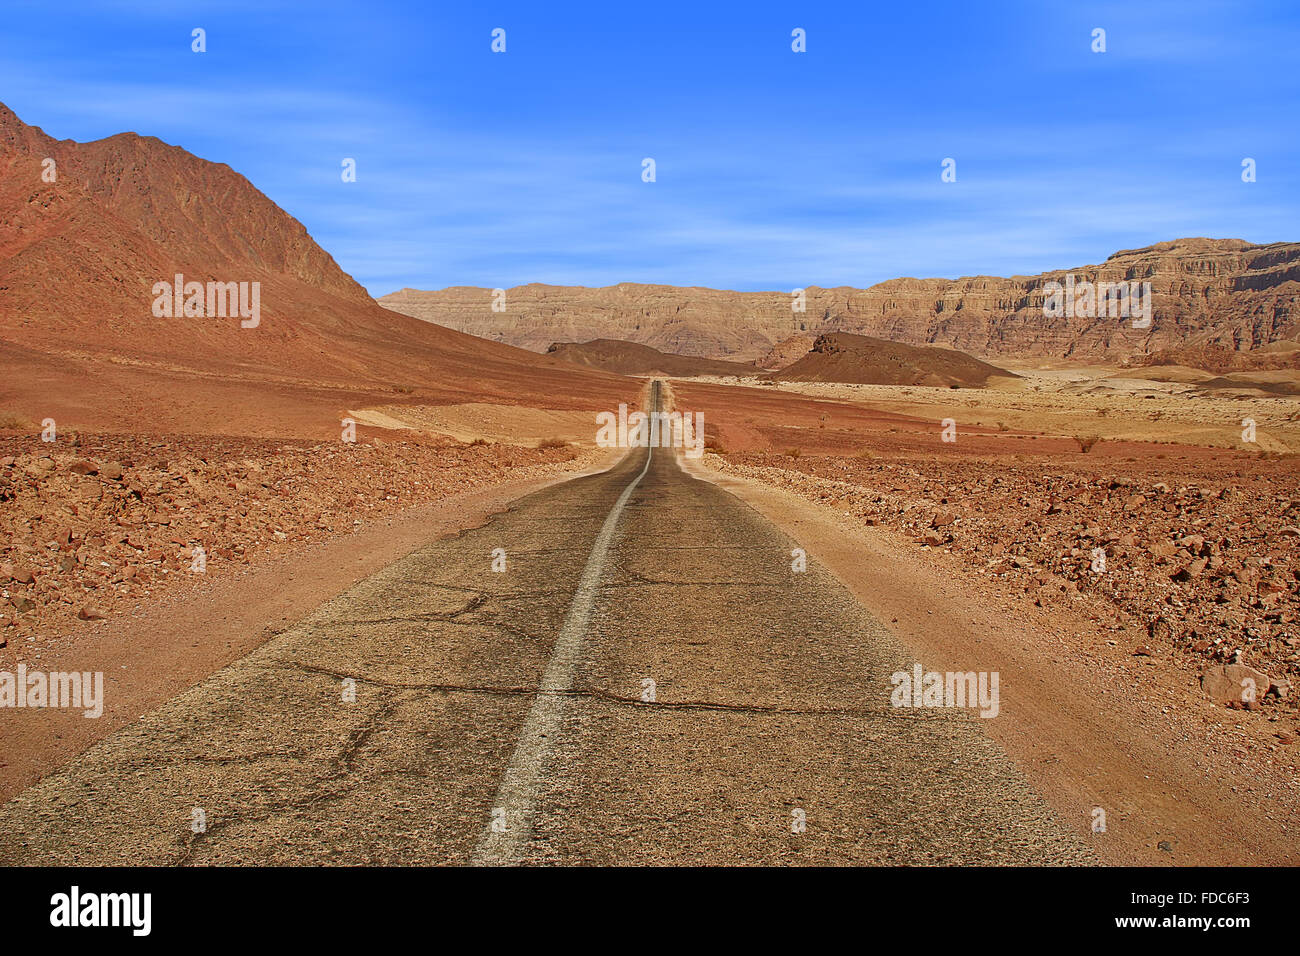 Paved road runs through Arava desert among red mountains in Timna national park, Israel. Stock Photo